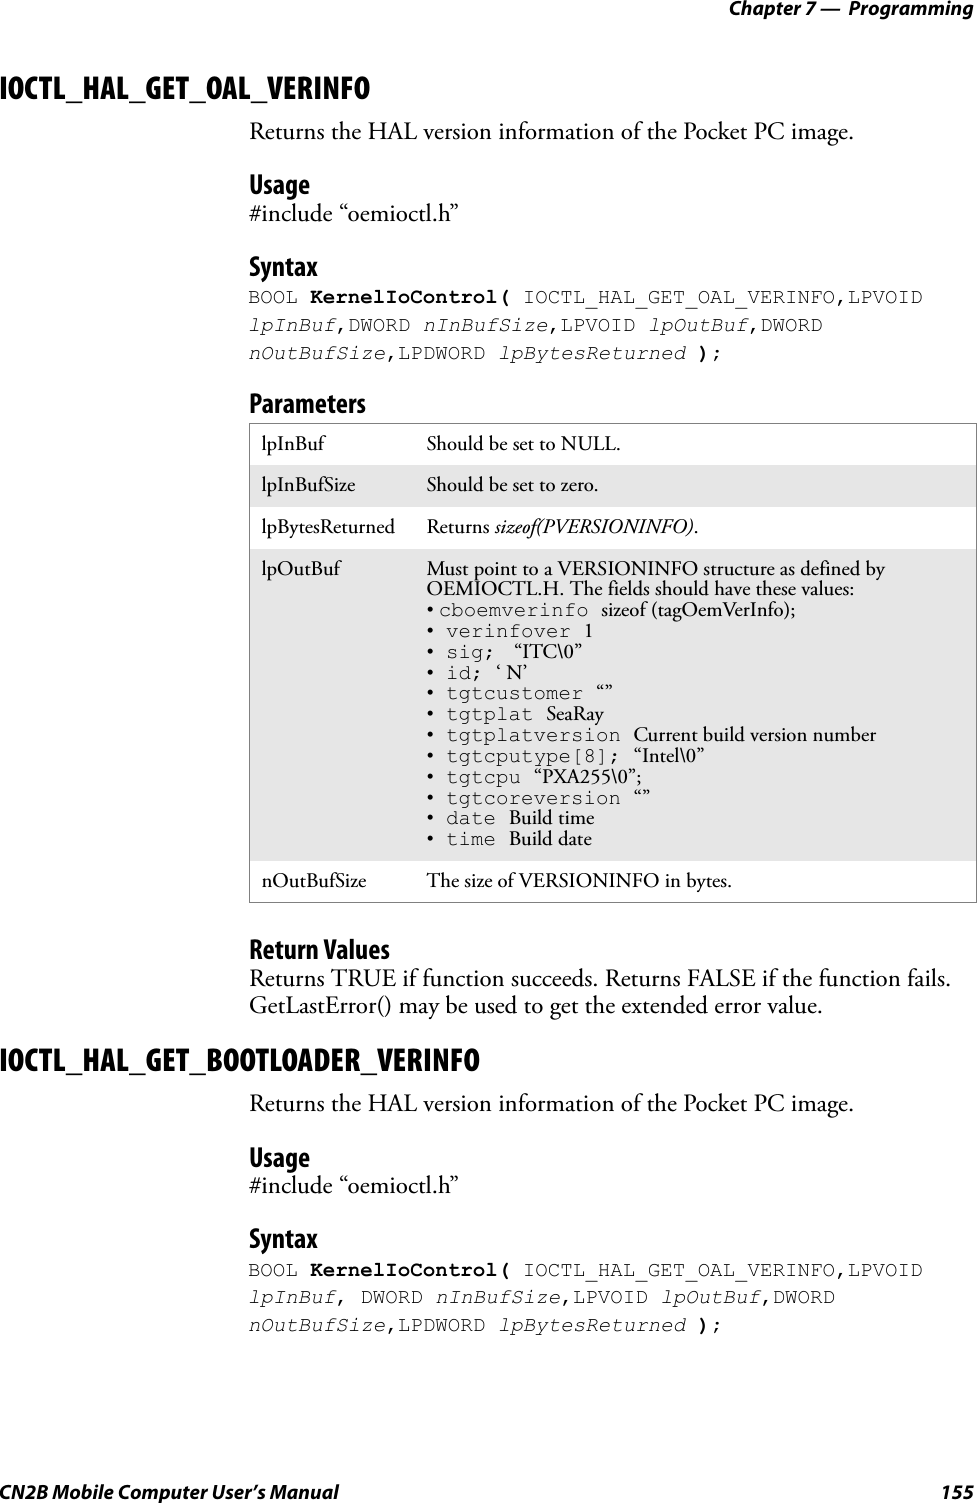 Chapter 7 —  ProgrammingCN2B Mobile Computer User’s Manual 155IOCTL_HAL_GET_OAL_VERINFOReturns the HAL version information of the Pocket PC image.Usage#include “oemioctl.h”SyntaxBOOL KernelIoControl( IOCTL_HAL_GET_OAL_VERINFO,LPVOID lpInBuf,DWORD nInBufSize,LPVOID lpOutBuf,DWORD nOutBufSize,LPDWORD lpBytesReturned );ParametersReturn ValuesReturns TRUE if function succeeds. Returns FALSE if the function fails. GetLastError() may be used to get the extended error value.IOCTL_HAL_GET_BOOTLOADER_VERINFOReturns the HAL version information of the Pocket PC image.Usage#include “oemioctl.h”SyntaxBOOL KernelIoControl( IOCTL_HAL_GET_OAL_VERINFO,LPVOID lpInBuf, DWORD nInBufSize,LPVOID lpOutBuf,DWORD nOutBufSize,LPDWORD lpBytesReturned );lpInBuf Should be set to NULL.lpInBufSize Should be set to zero.lpBytesReturned Returns sizeof(PVERSIONINFO).lpOutBuf Must point to a VERSIONINFO structure as defined by OEMIOCTL.H. The fields should have these values:• cboemverinfo sizeof (tagOemVerInfo);• verinfover 1• sig;  “ITC\0”• id; ‘ N’• tgtcustomer “”• tgtplat SeaRay• tgtplatversion Current build version number• tgtcputype[8]; “Intel\0”• tgtcpu “PXA255\0”;• tgtcoreversion “”• date Build time• time Build datenOutBufSize The size of VERSIONINFO in bytes.